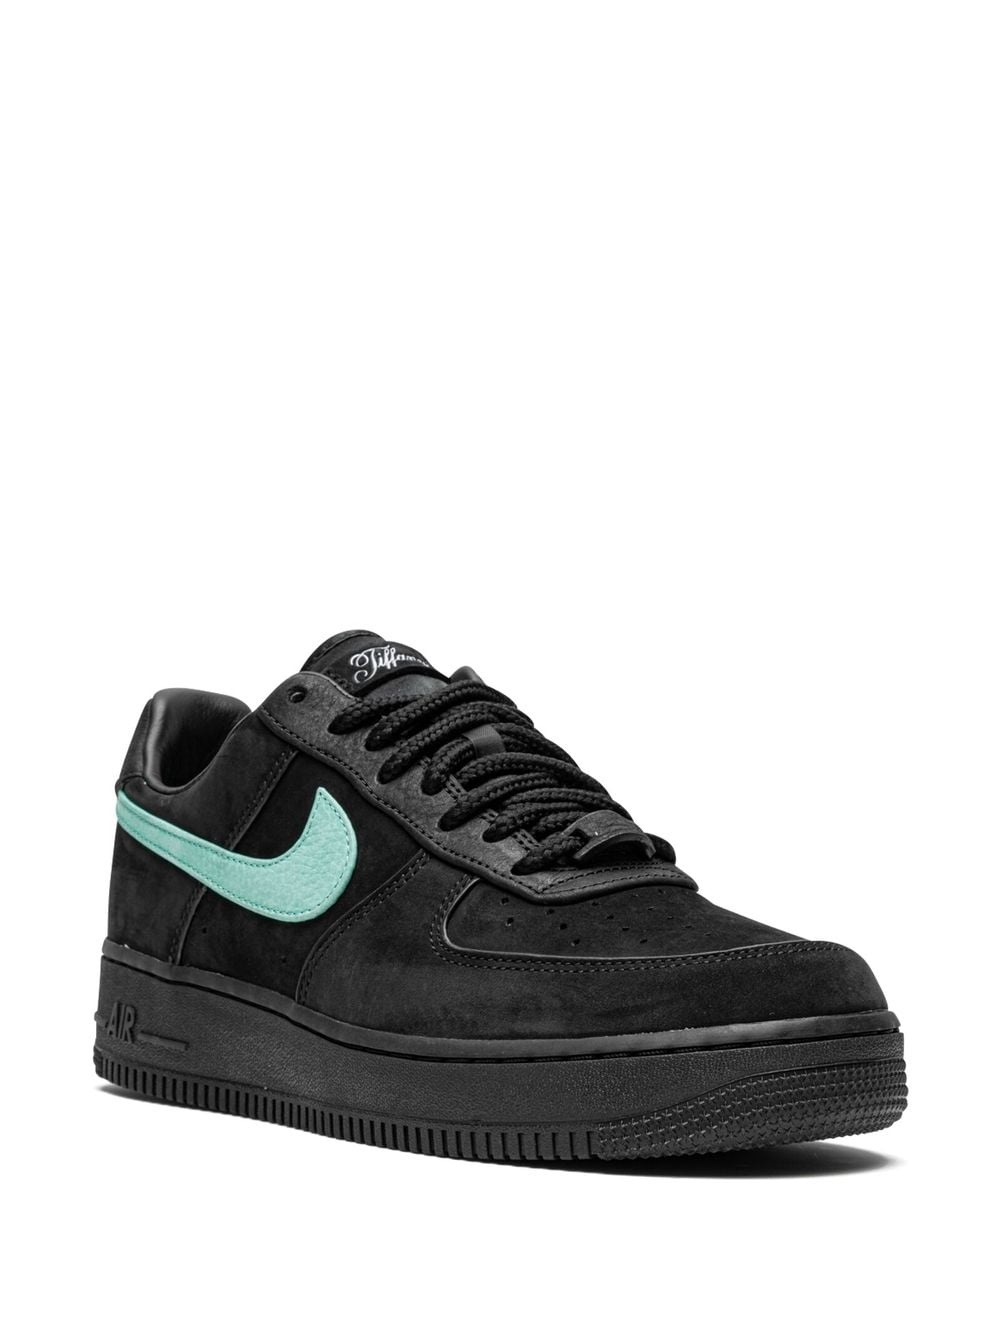 x Tiffany and Co. Air Force 1 Low sneakers - 2